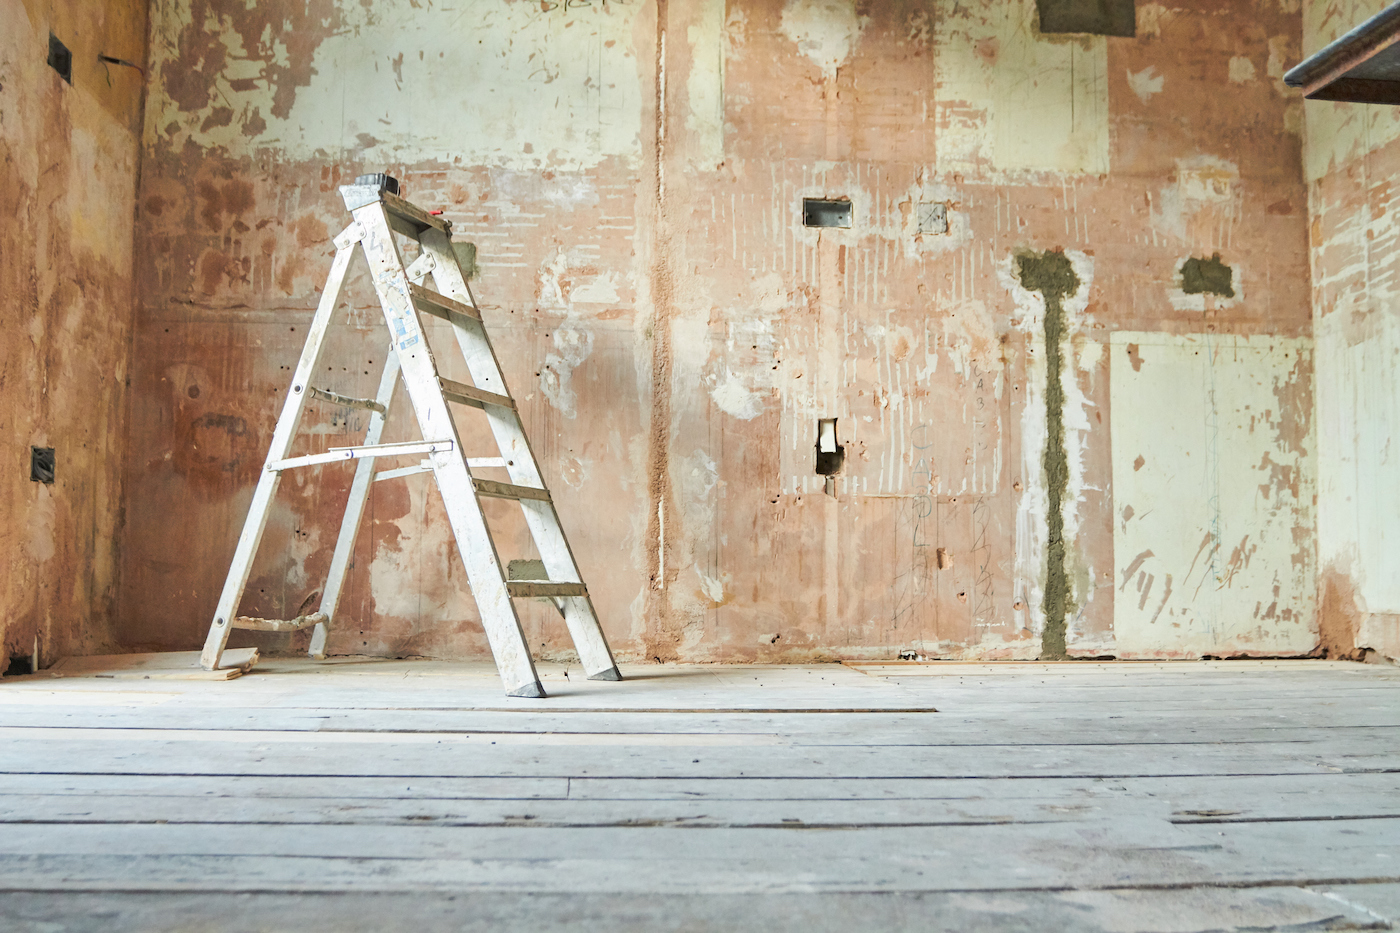 A stepladder standing in an empty domestic room in mid-renovation.